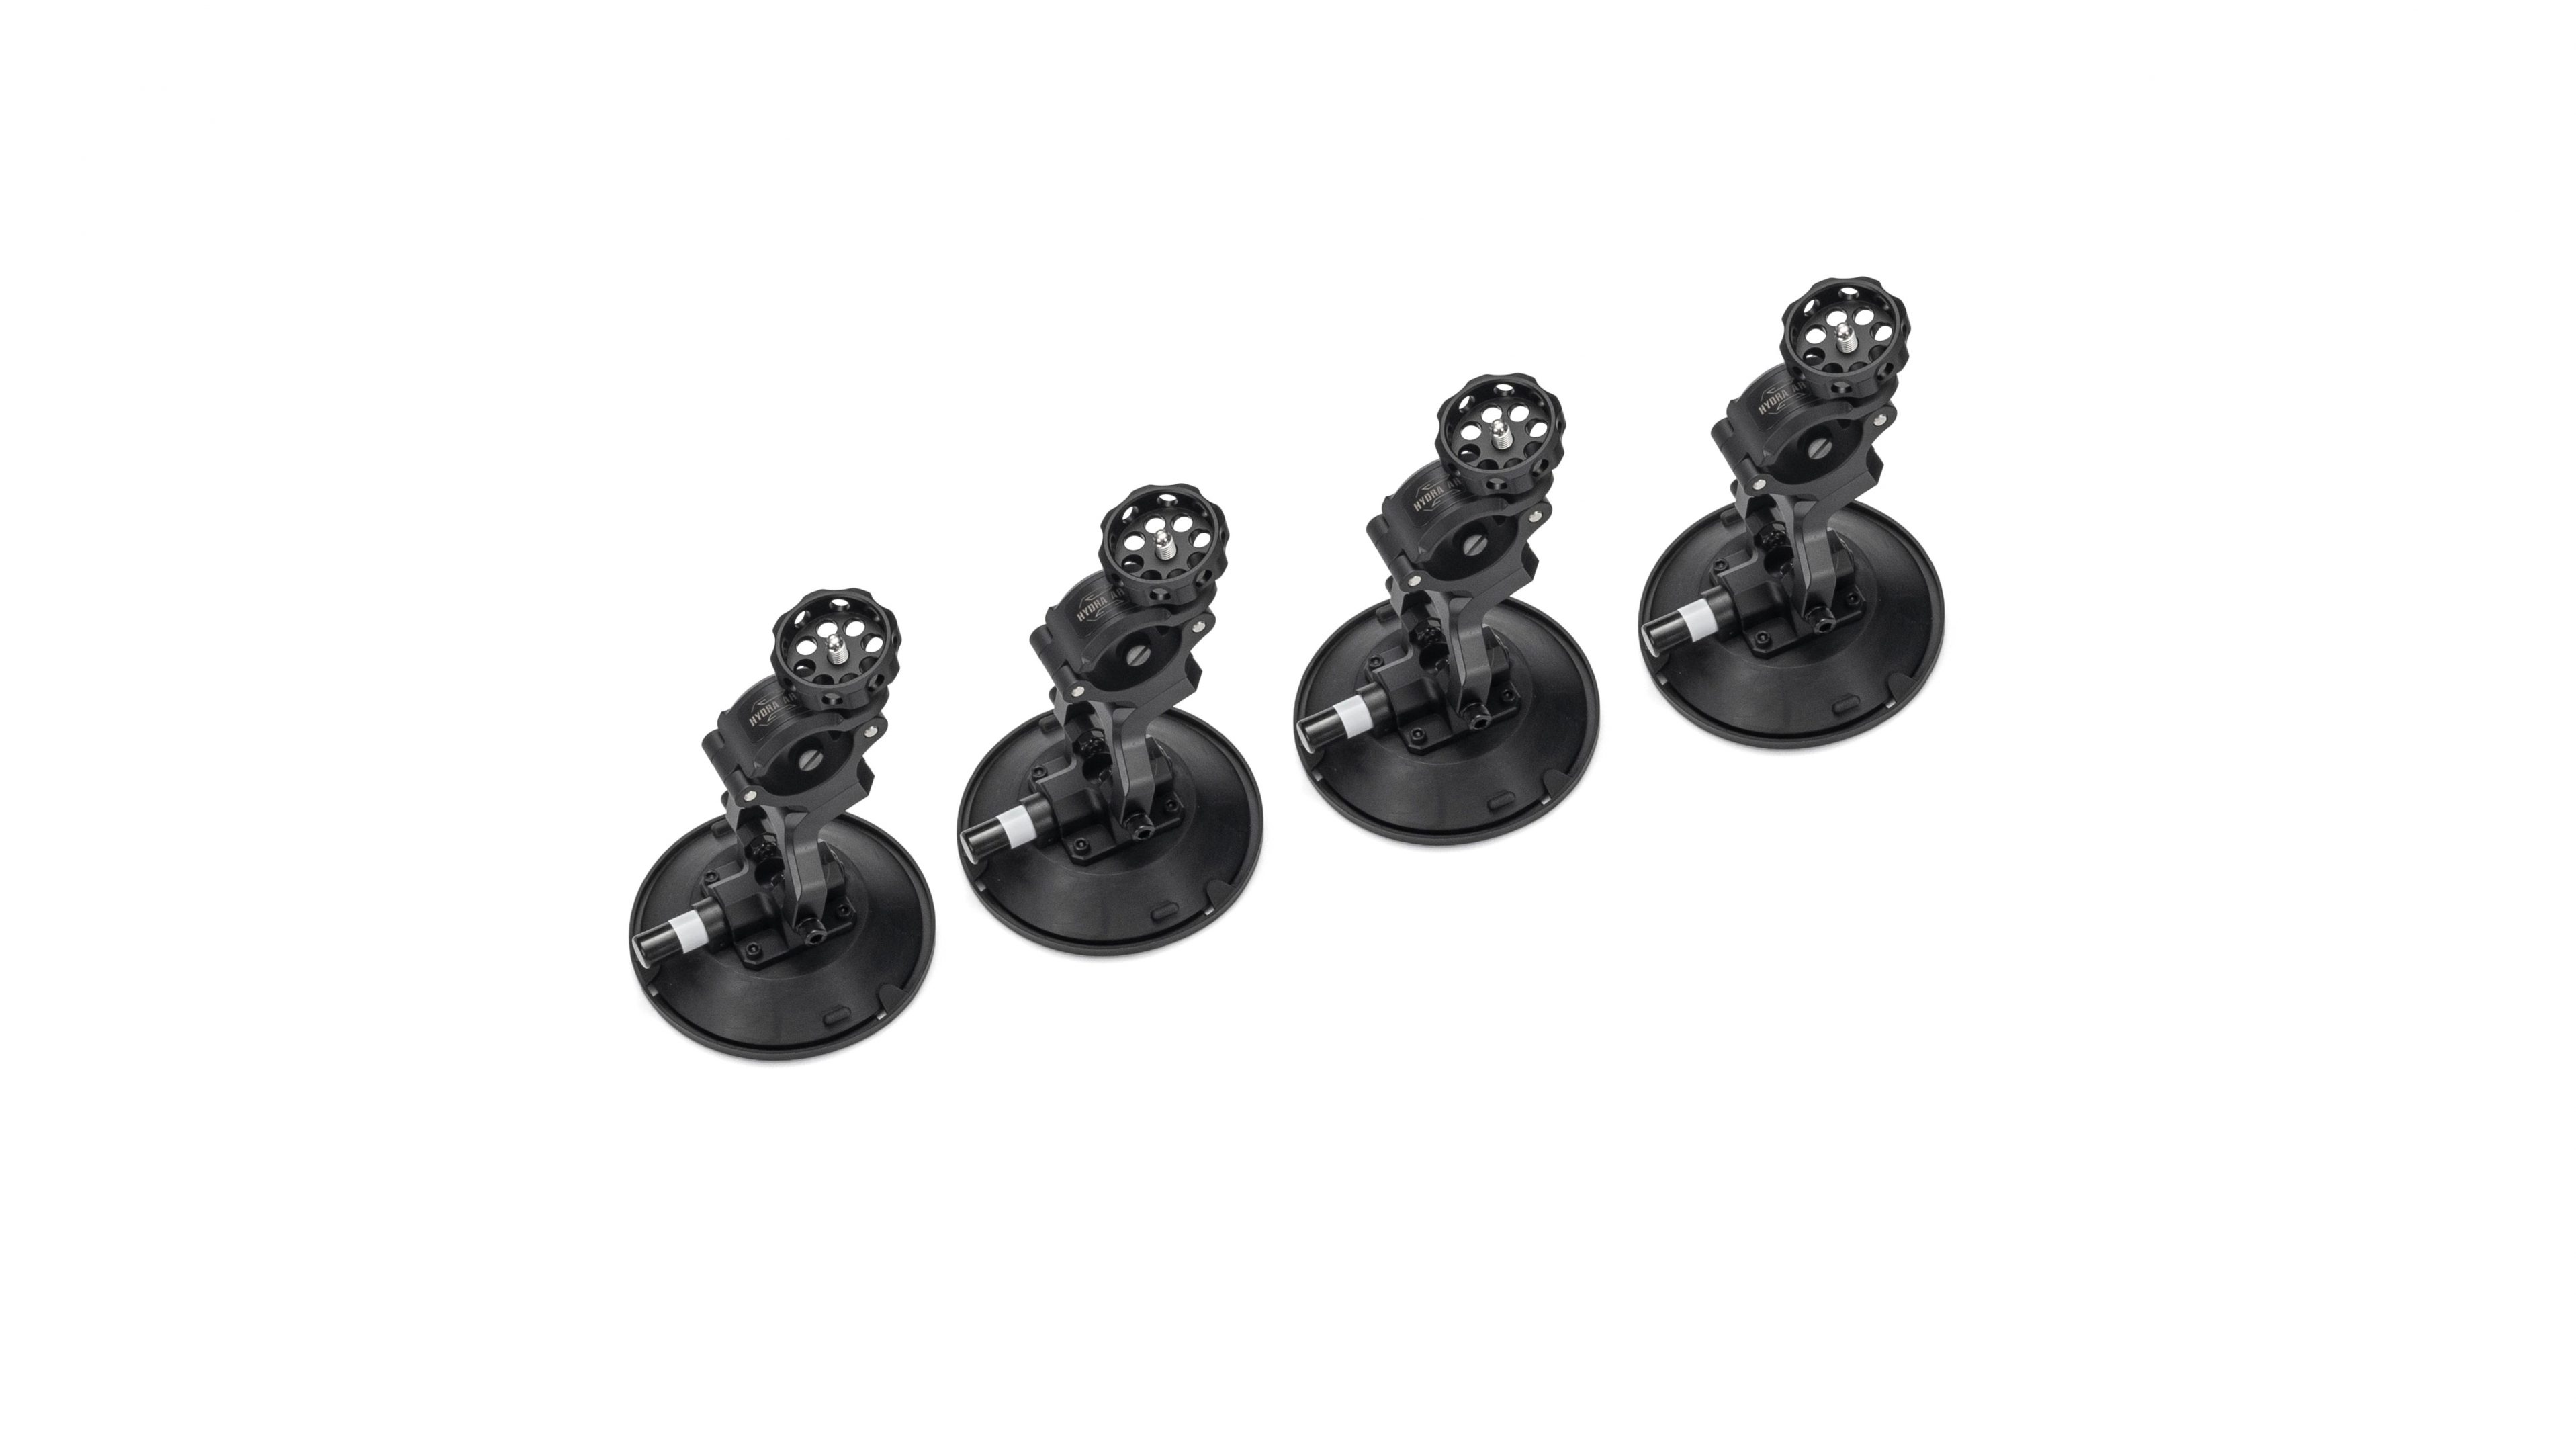 Speed Rail Mounting Suction Cup Kit | Tilta